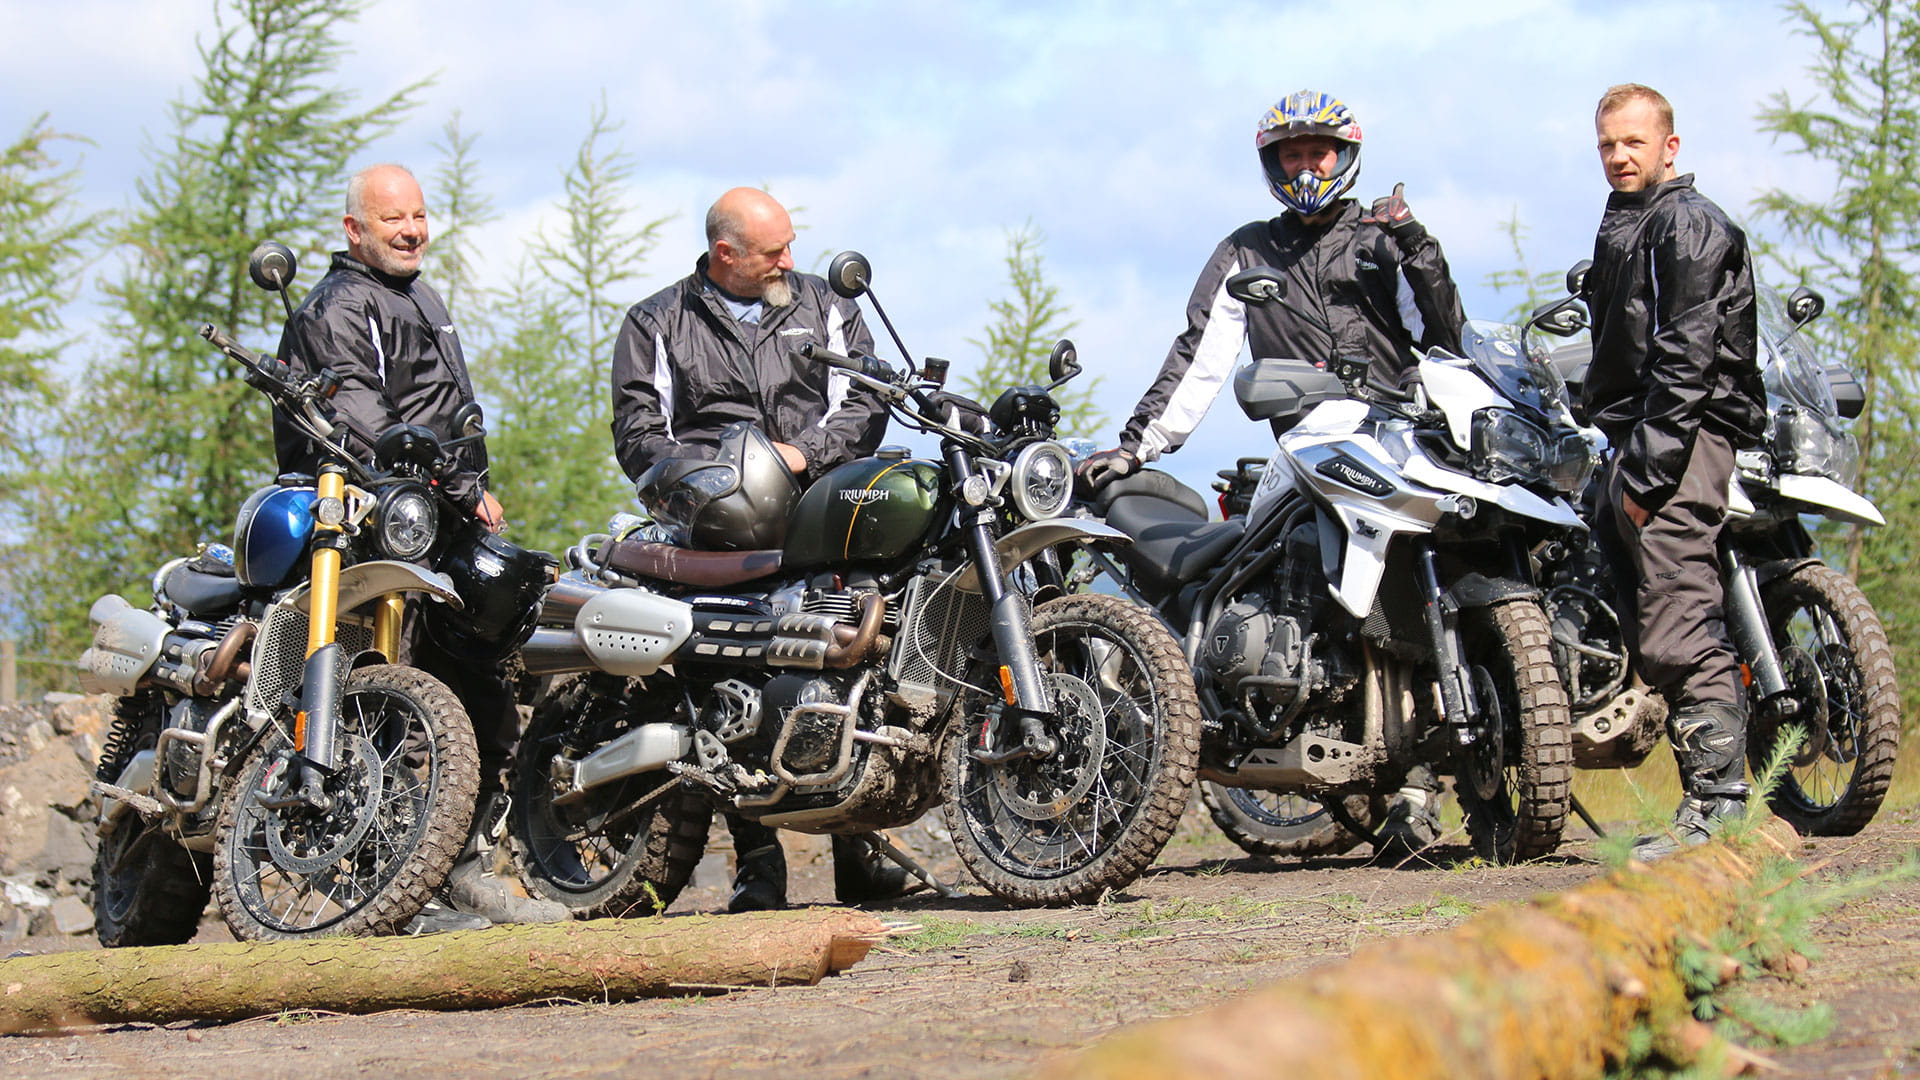 Riders experiencing the Triumph motorcycles including the Tiger and Scrambler 1200 range 